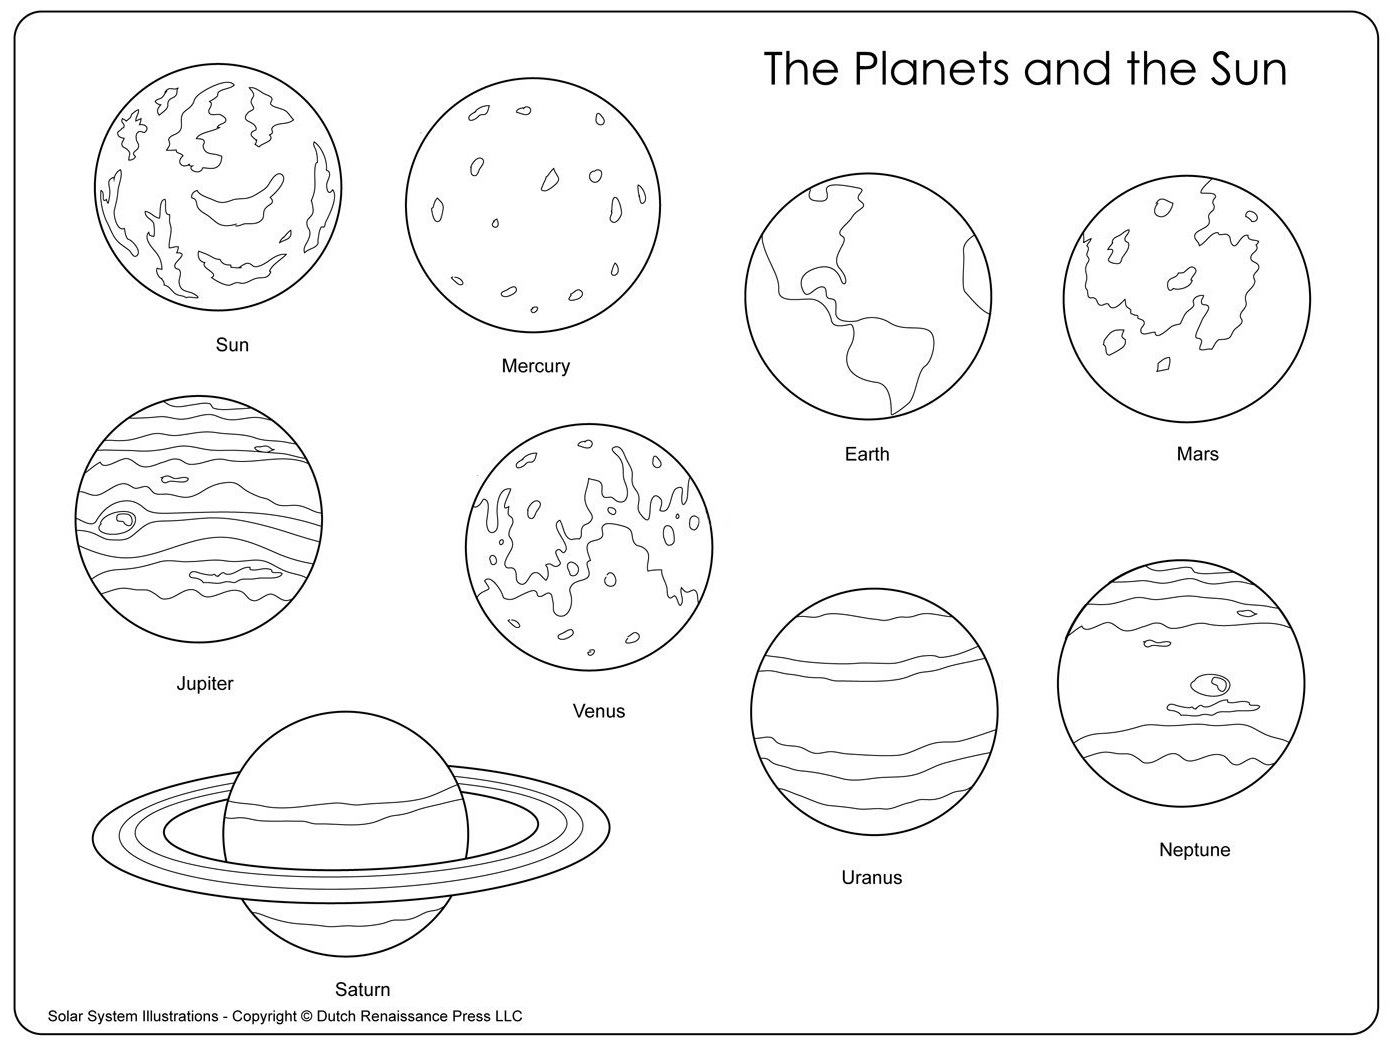 The Planets And The Sun Coloring Pages   Coloring Cool